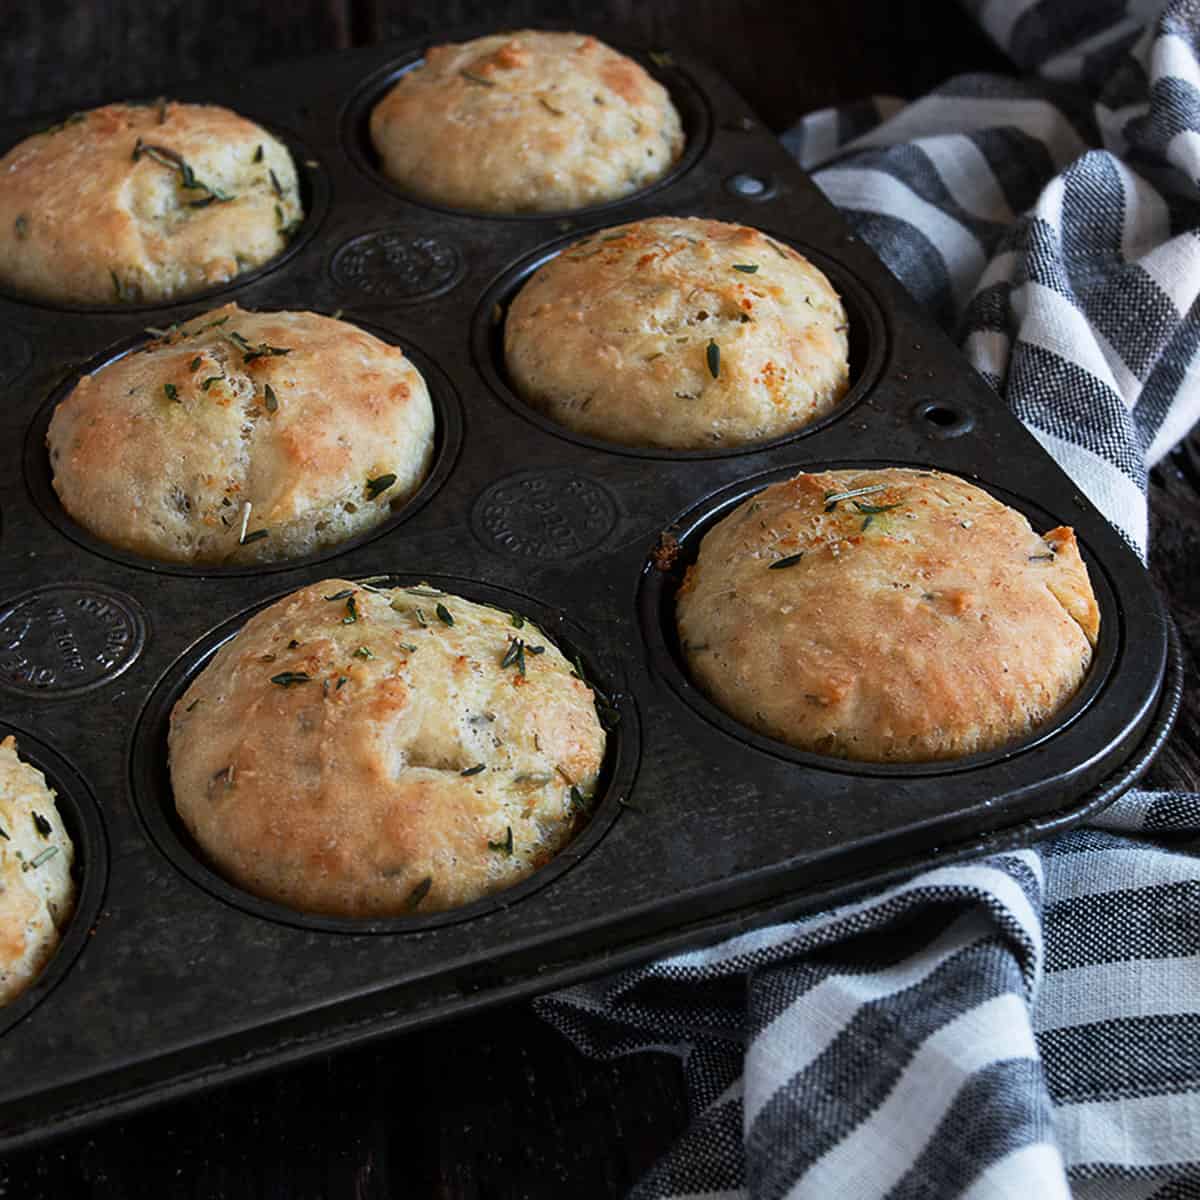 Muffin Pan Recipes That Are Quick and Easy